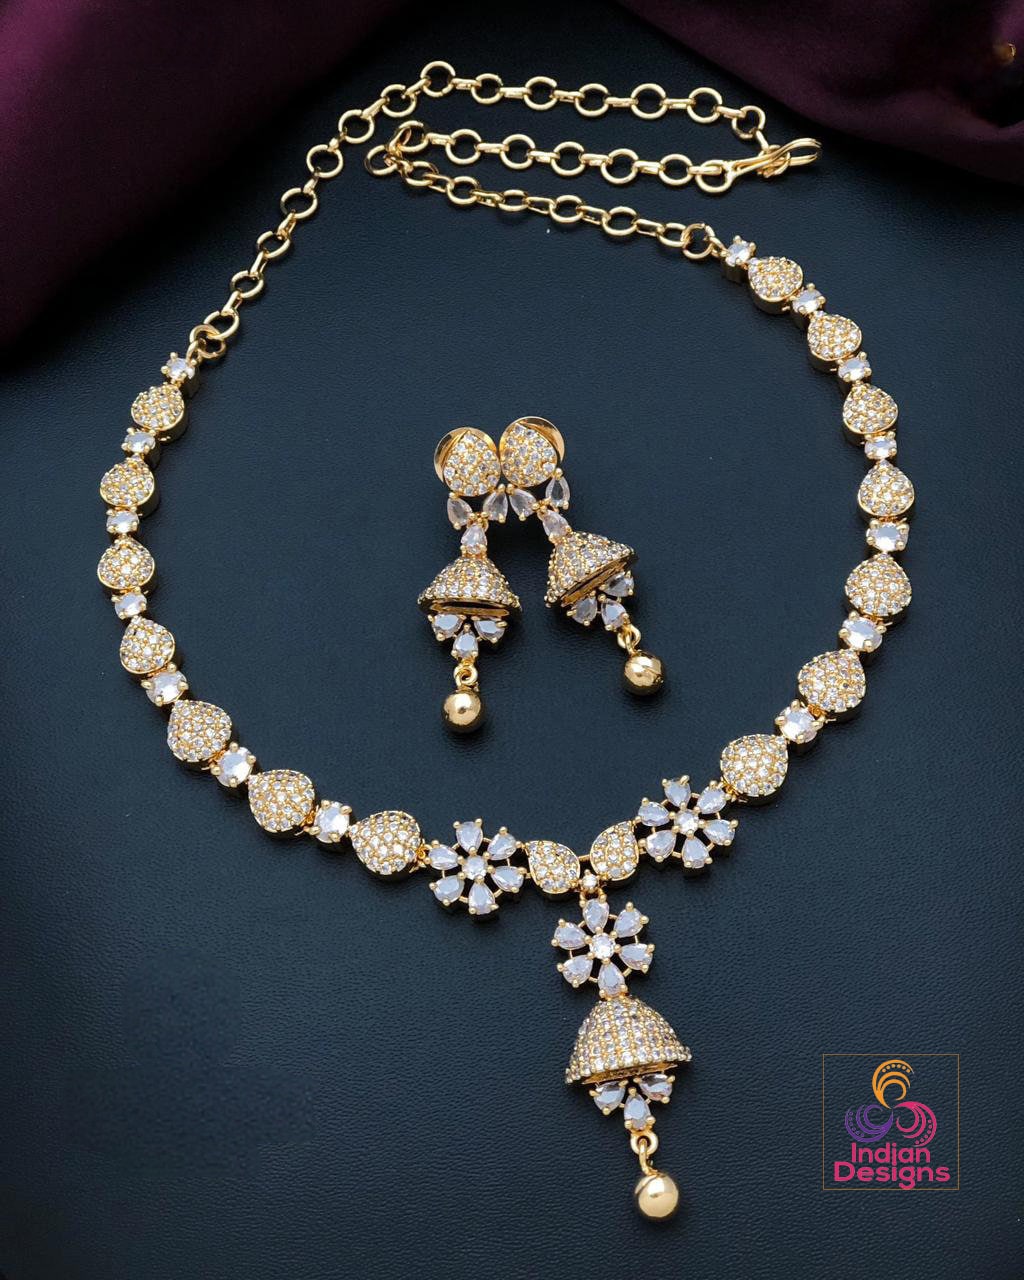 Elegant and Small Gold plated American Diamond Choker Earring set | CZ Diamond Dainty necklace Earring set| Gift for her |Indian jewelry